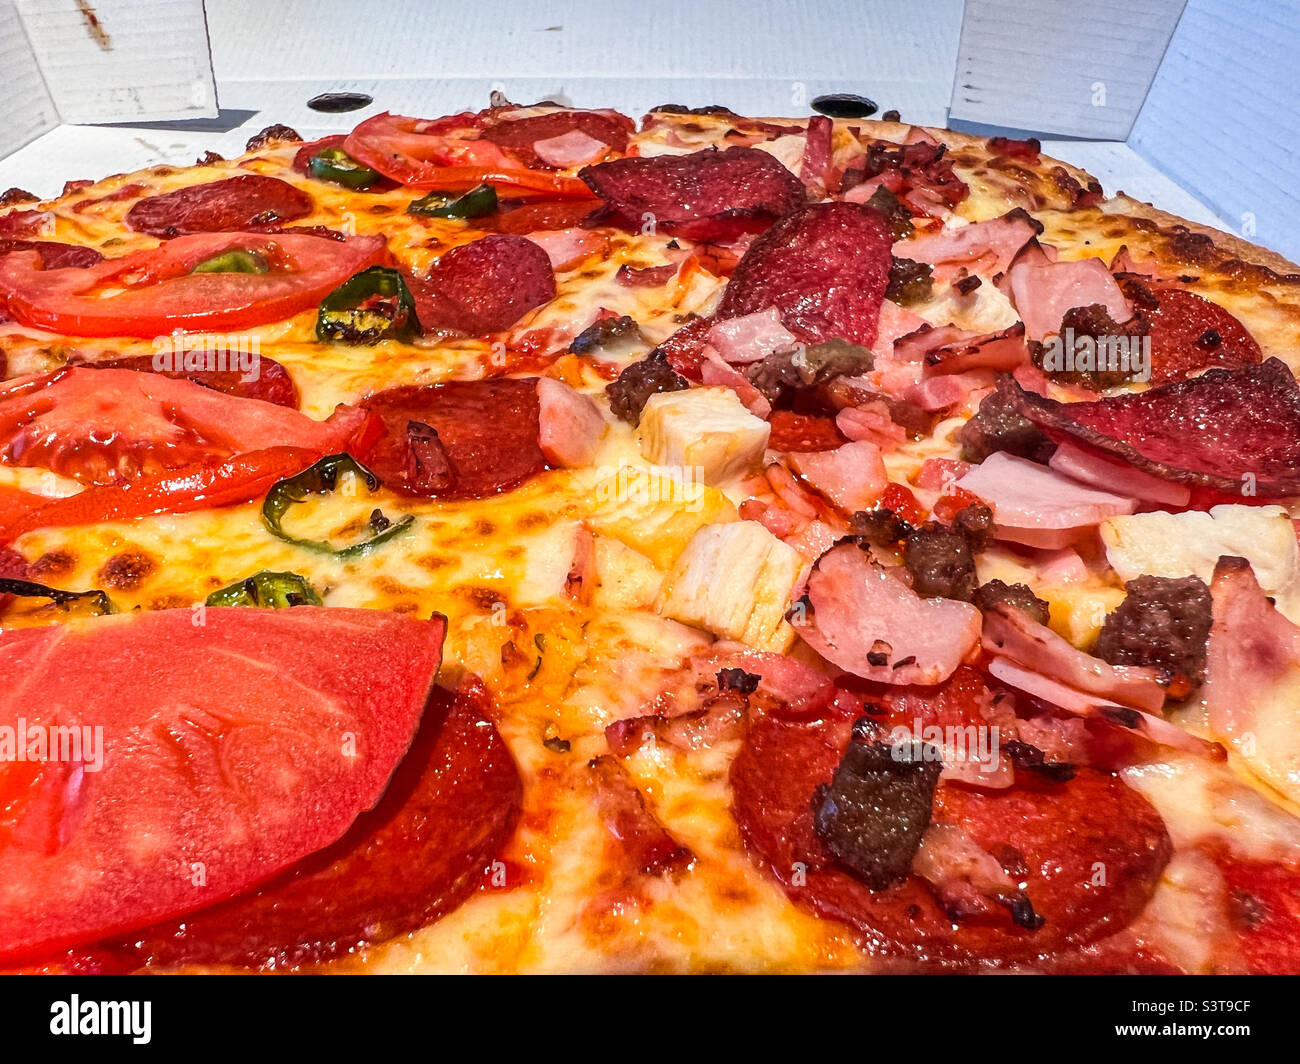 Meat feast pizza Stock Photo